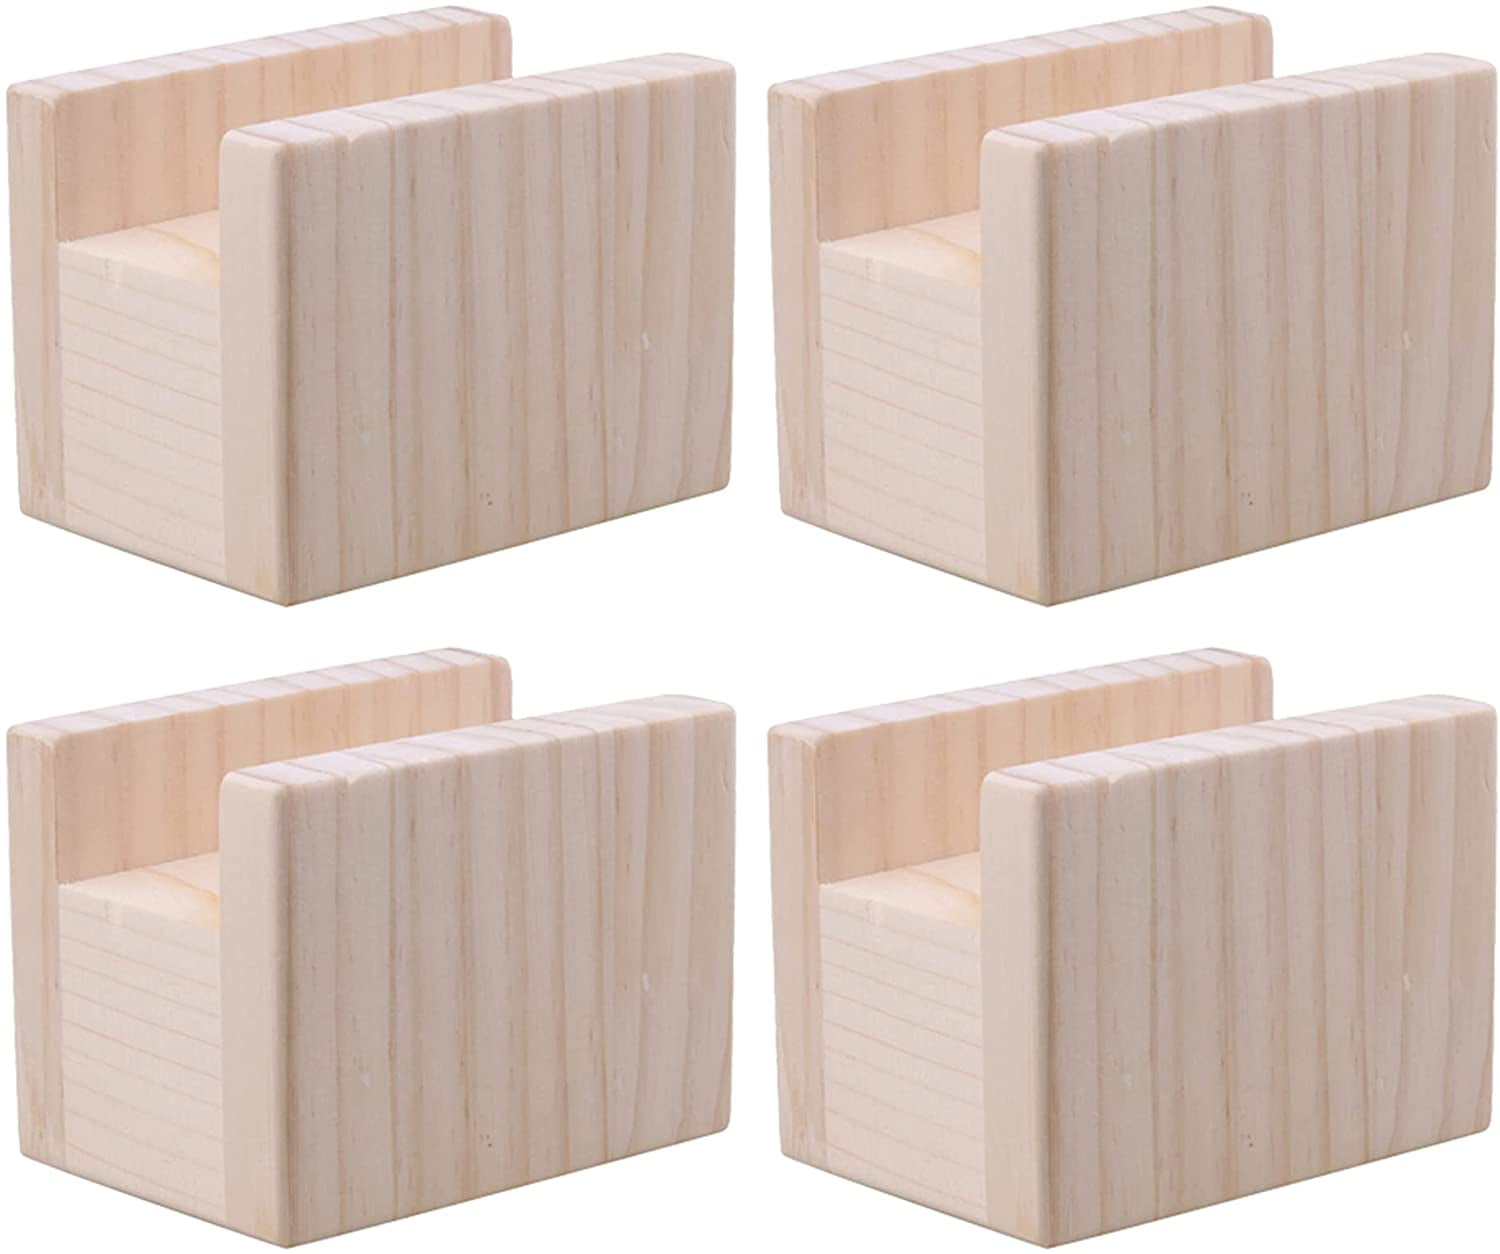 Bed Raisers Table Risers 10Cm Lifting Height 5Cm Furniture Risers For Beds/Sofas/Chairs Inner Diameter Of The Groove 4-Pack T Wooden Heavy Duty 